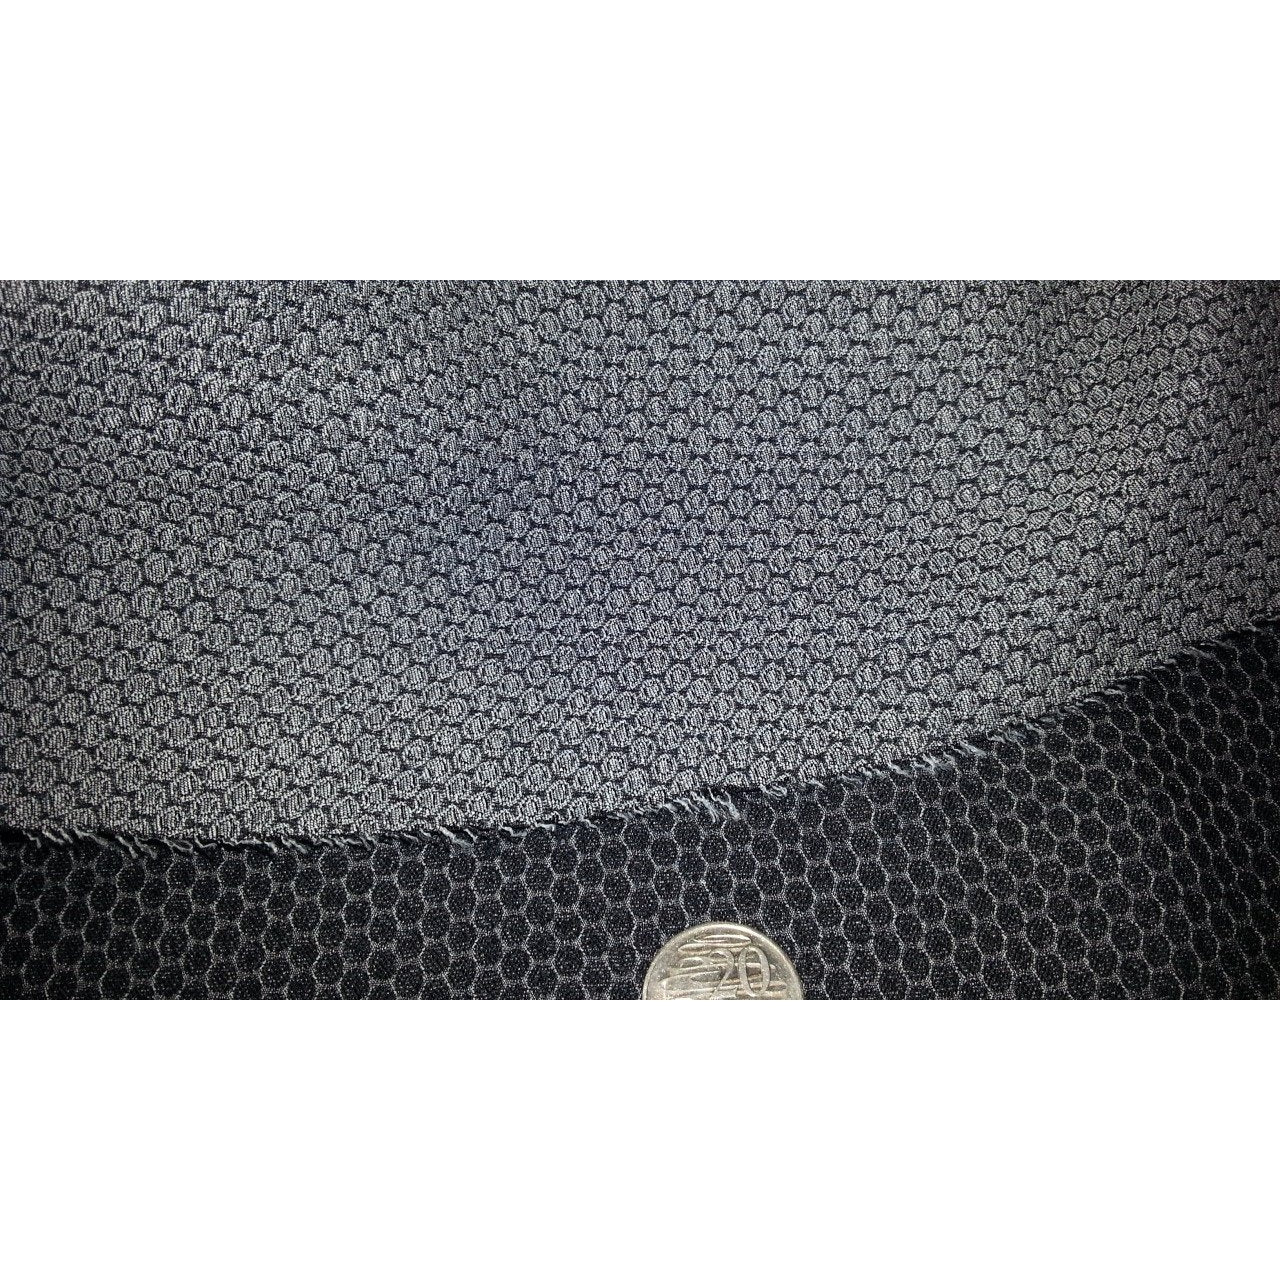 Woven crepe fabric - sold by 1/2mtr